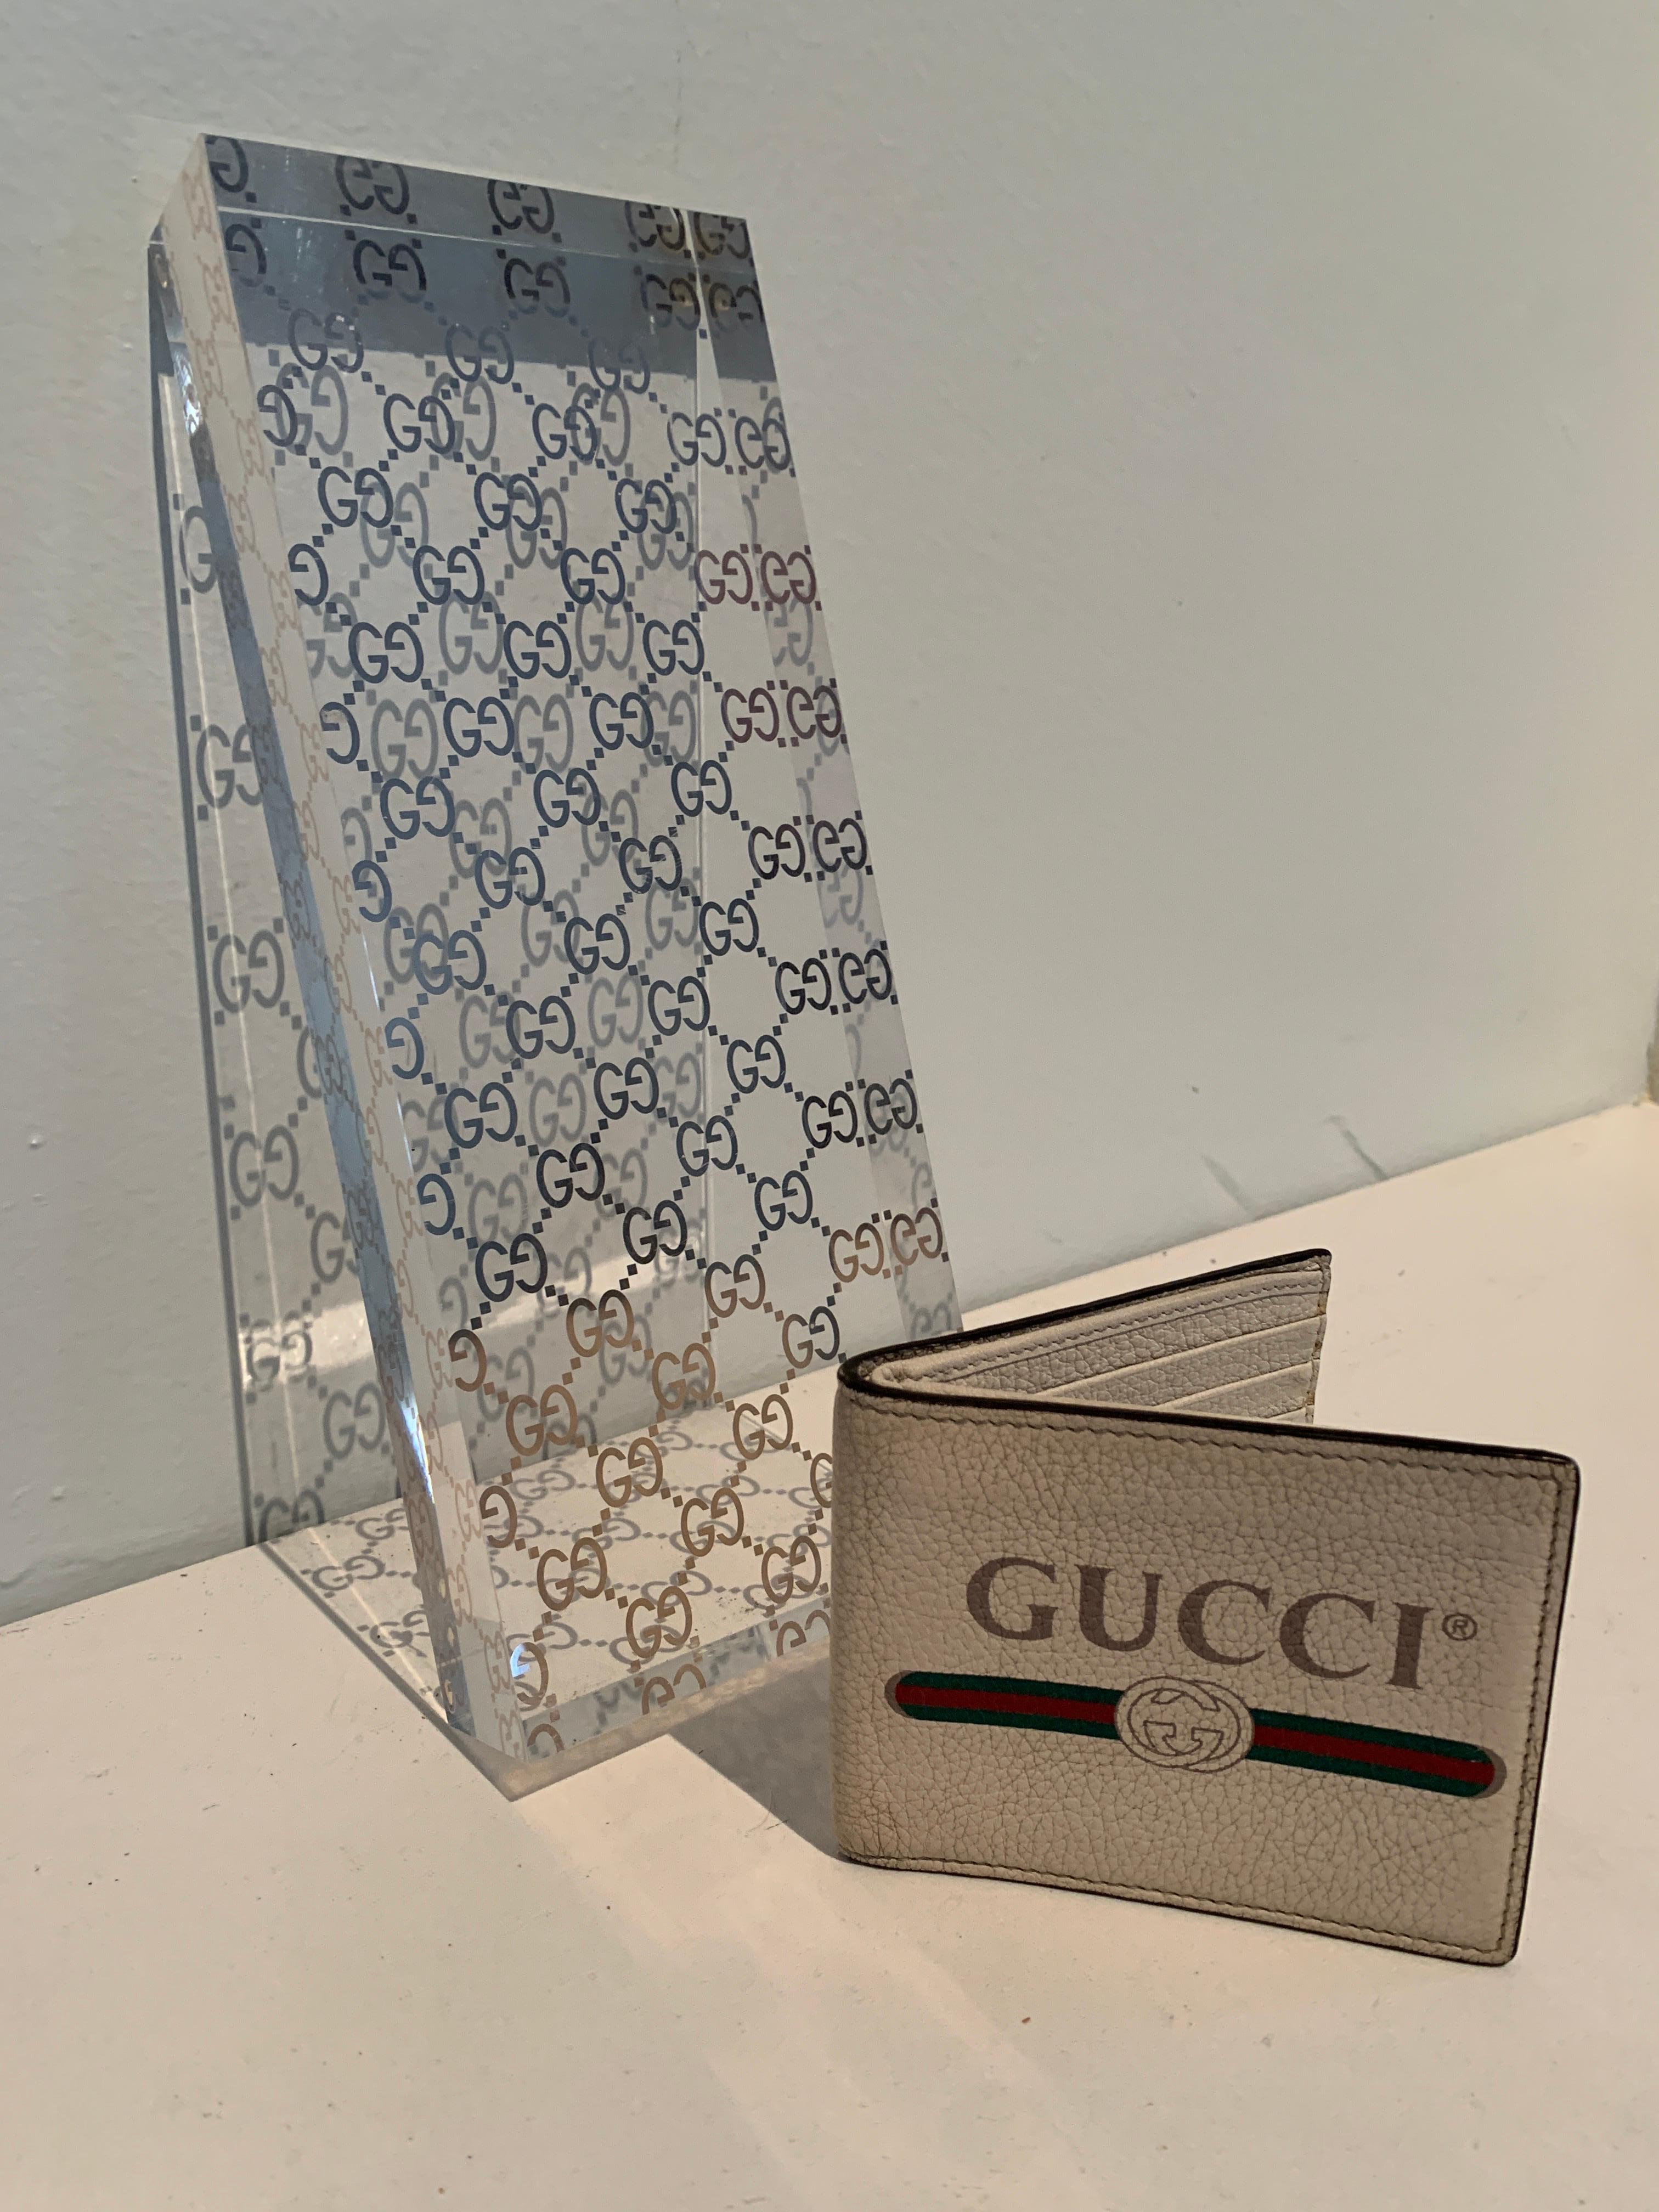 acrylic display stands